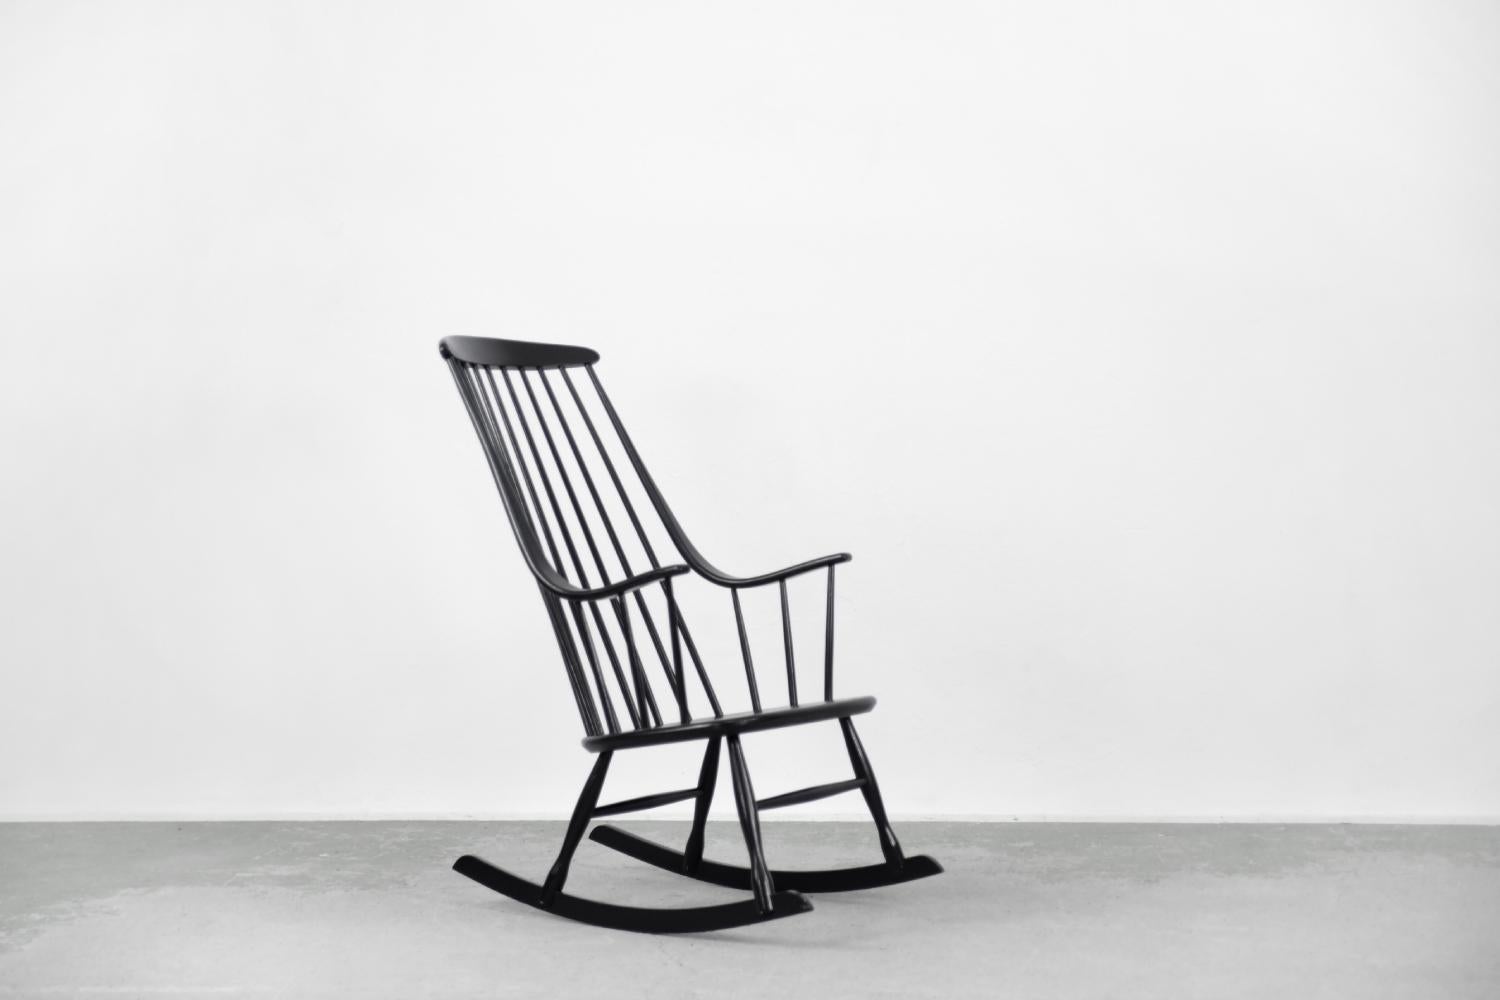 Beech Vintage Swedish Wooden Black Rocking Chair Grandessa by Lena Larsson for Nesto For Sale